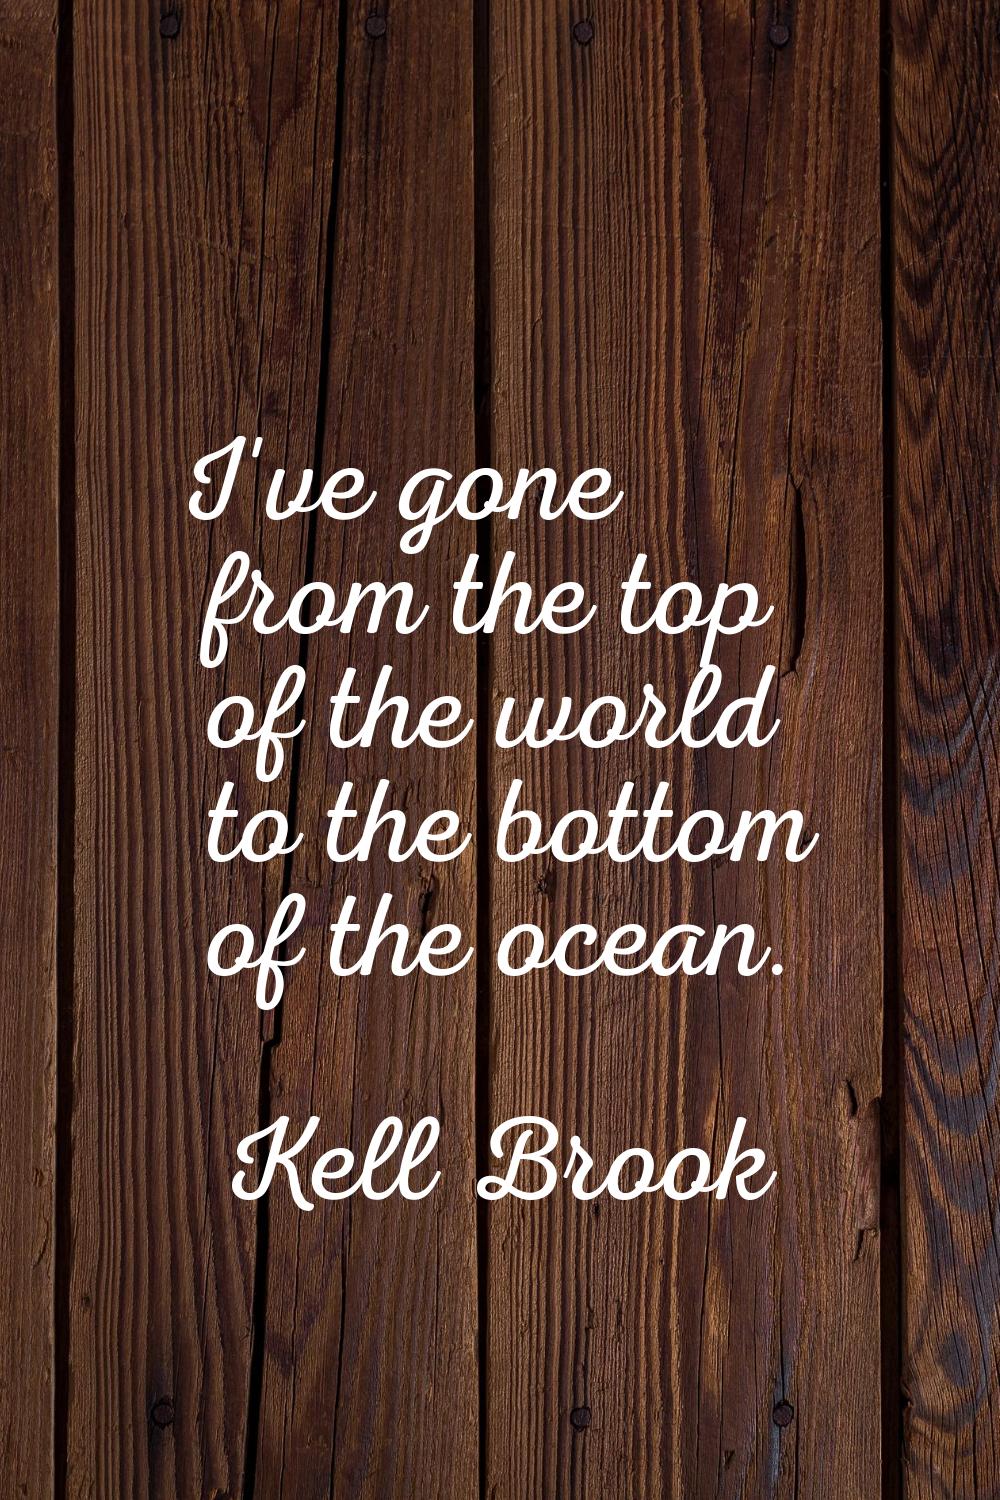 I've gone from the top of the world to the bottom of the ocean.